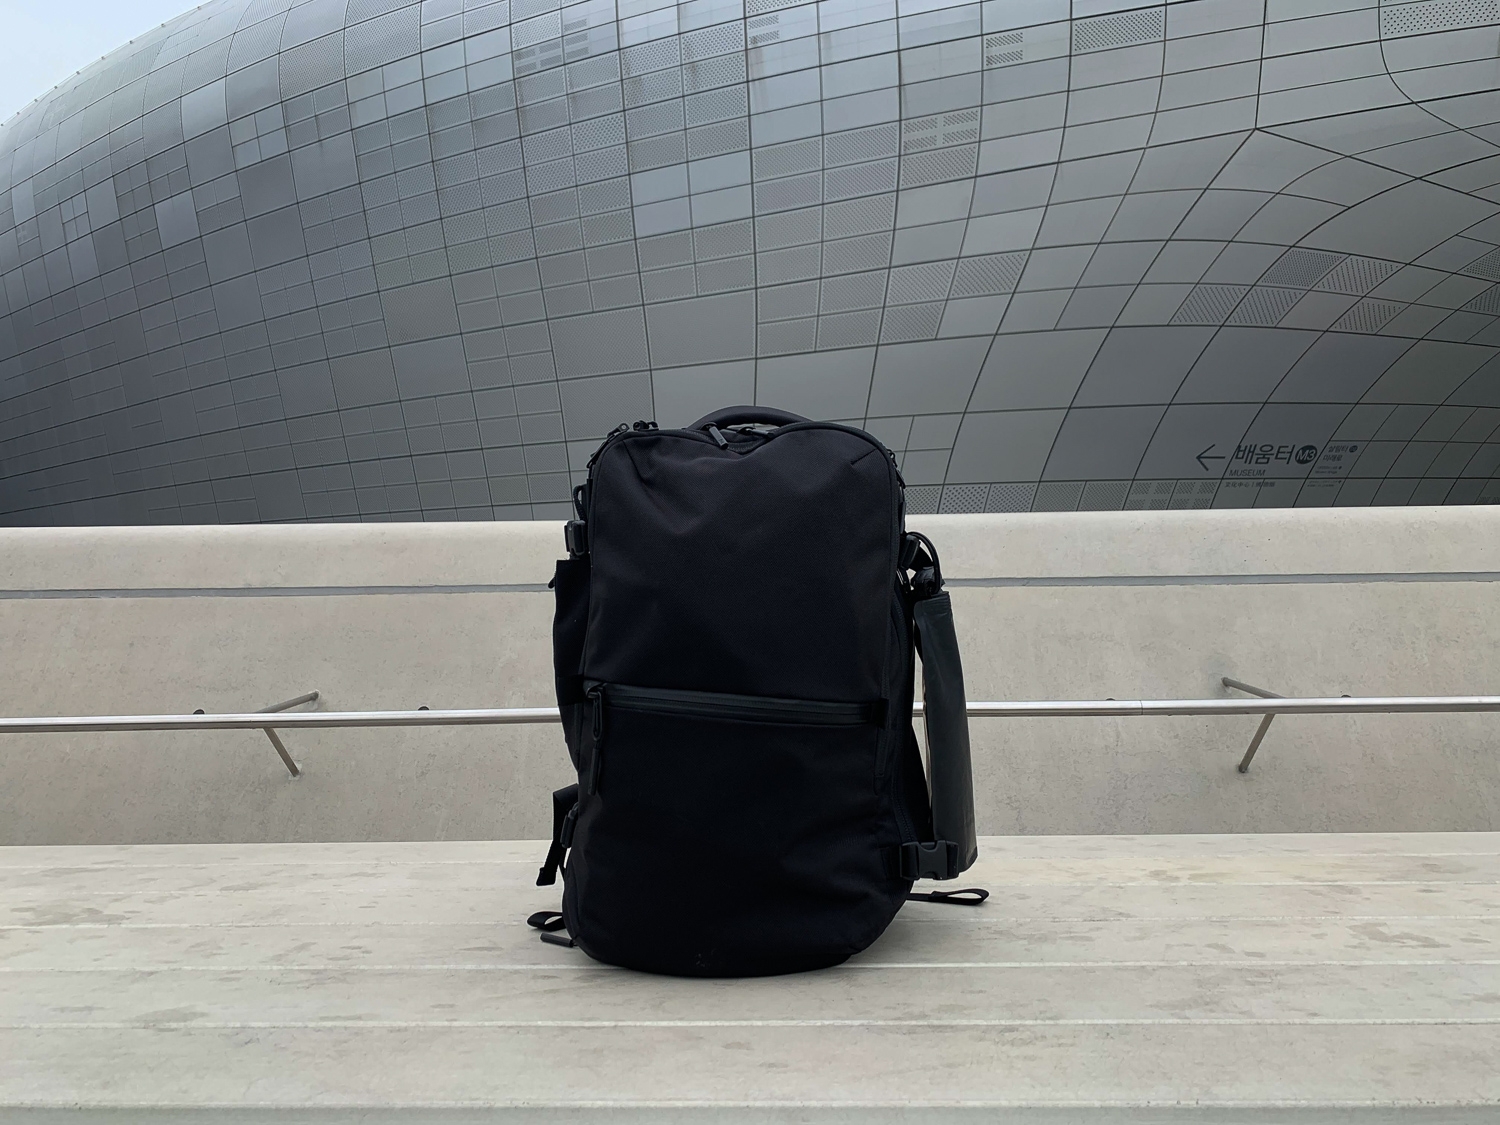 Aer Travel Pack 2 Review - Alex Kwa